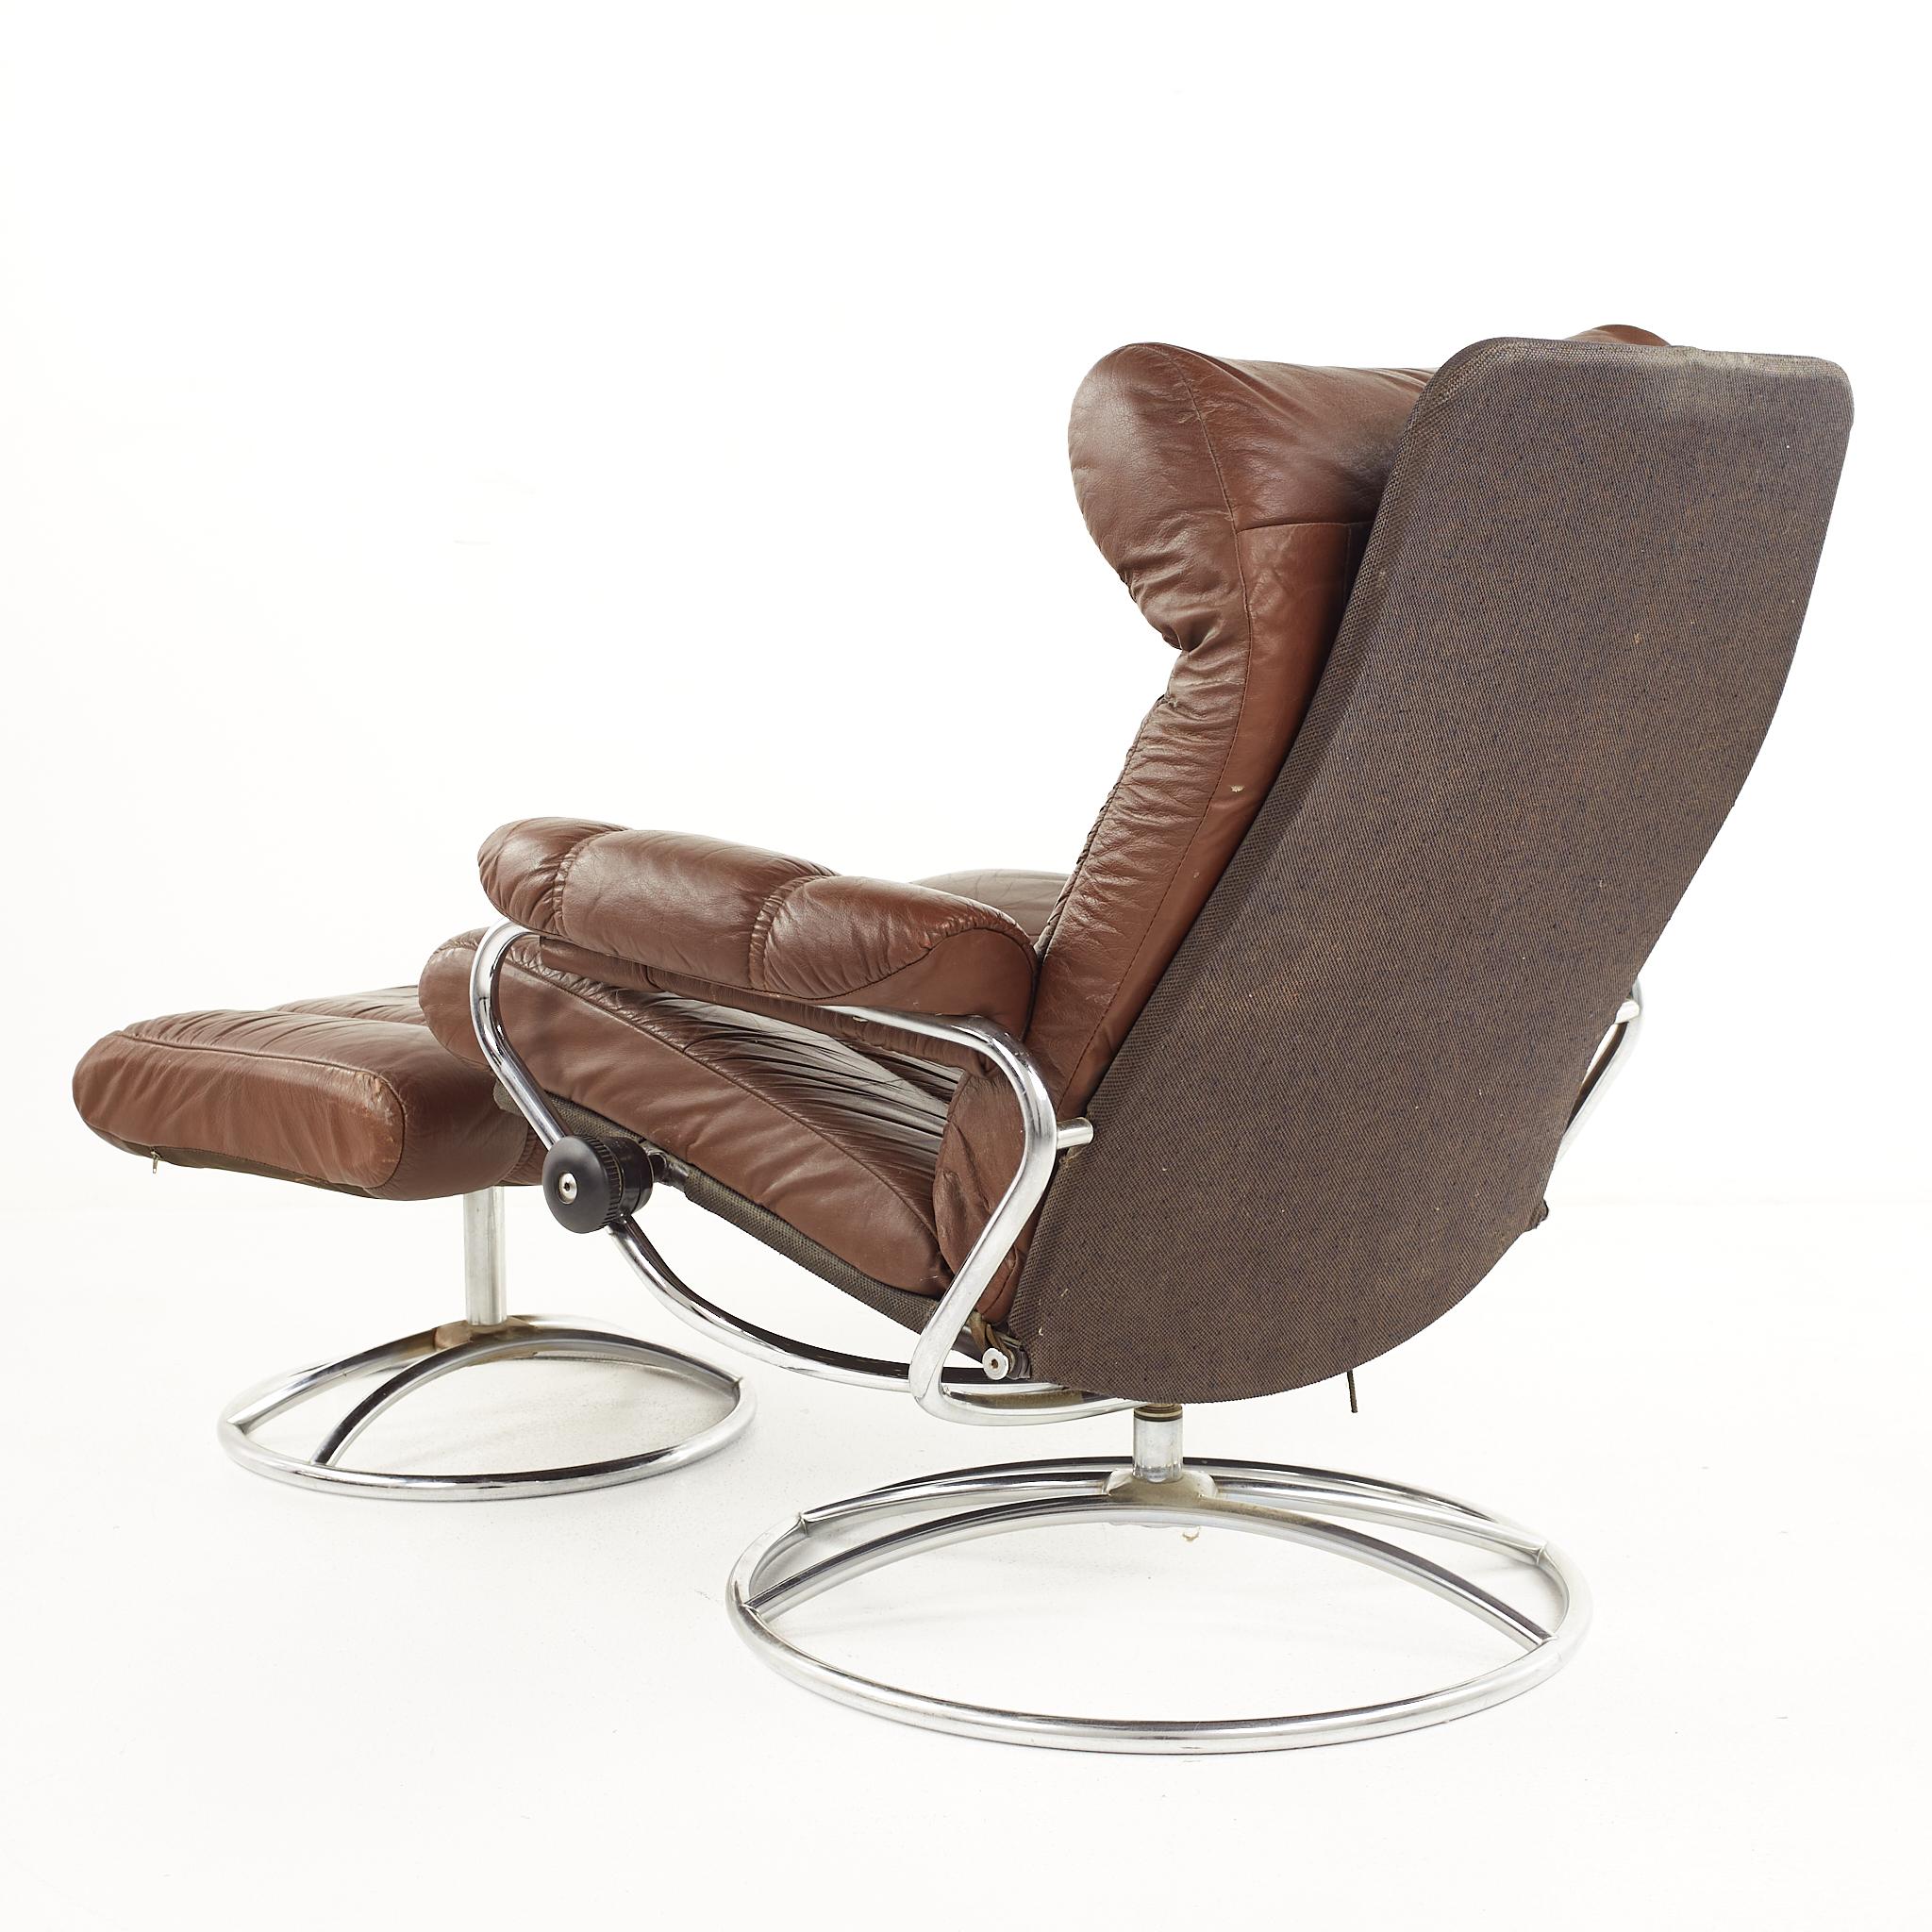 Late 20th Century Ekornes Mid-Century Chrome and Leather Stressless Lounge Chair and Ottoman